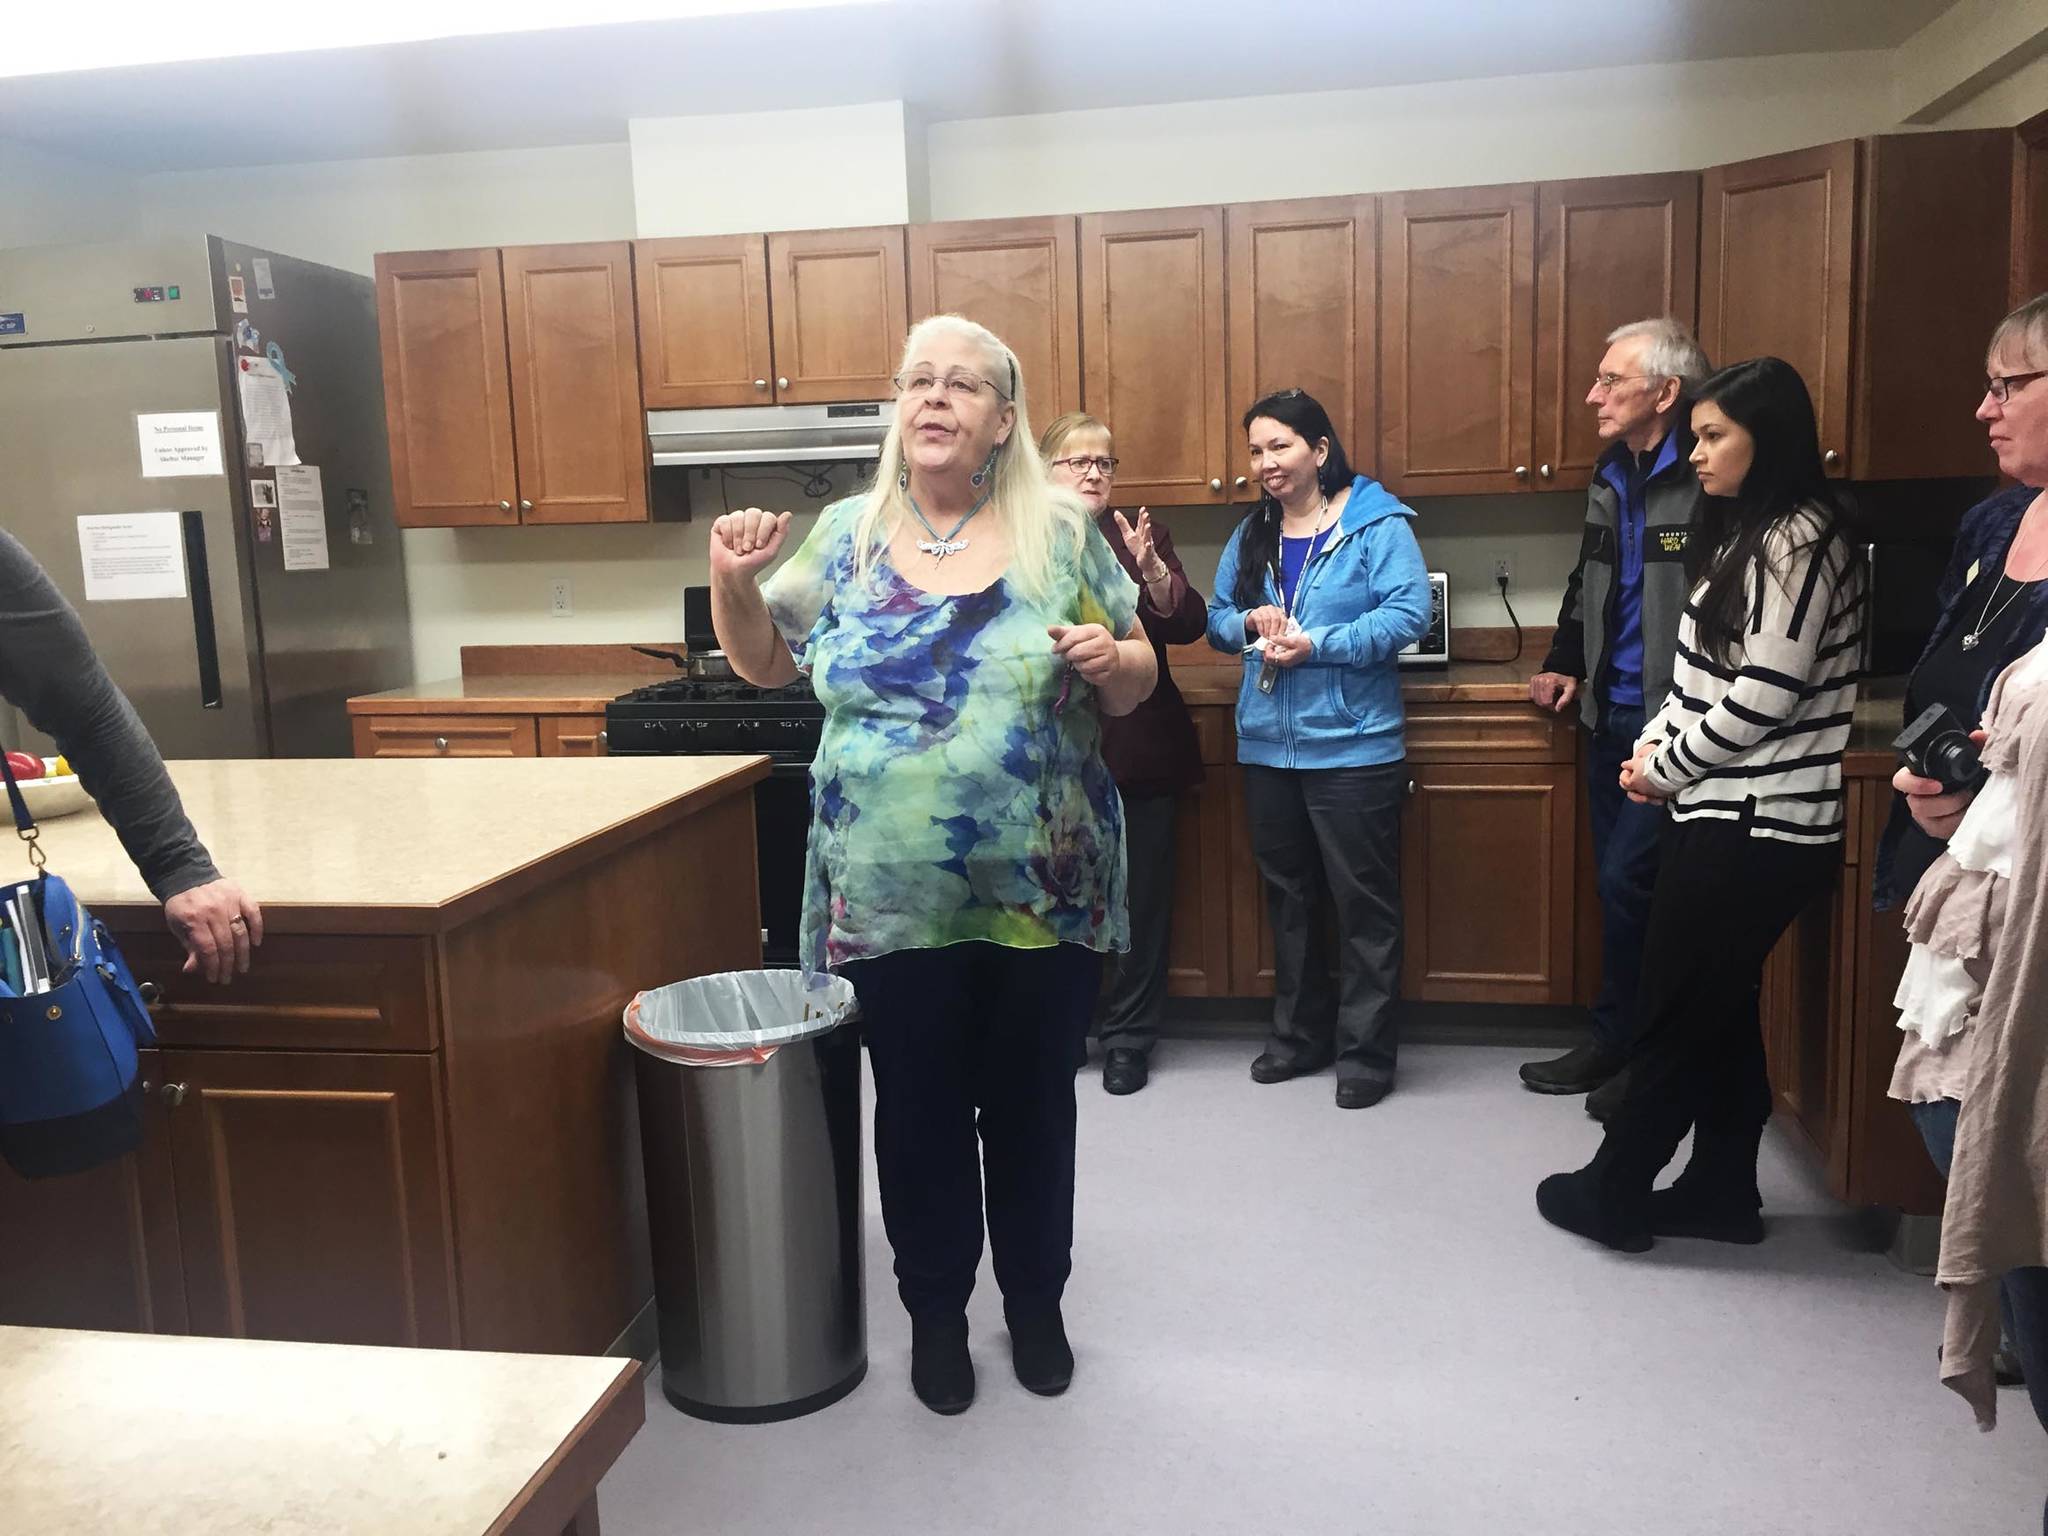 Karen Stroh, shelter manager at the LeeShore Center, shows guests around the shelter’s recently remodeled kitchen Thursday, March 9, 2017 in Kenai, Alaska. (Megan Pacer/Peninsula Clarion)